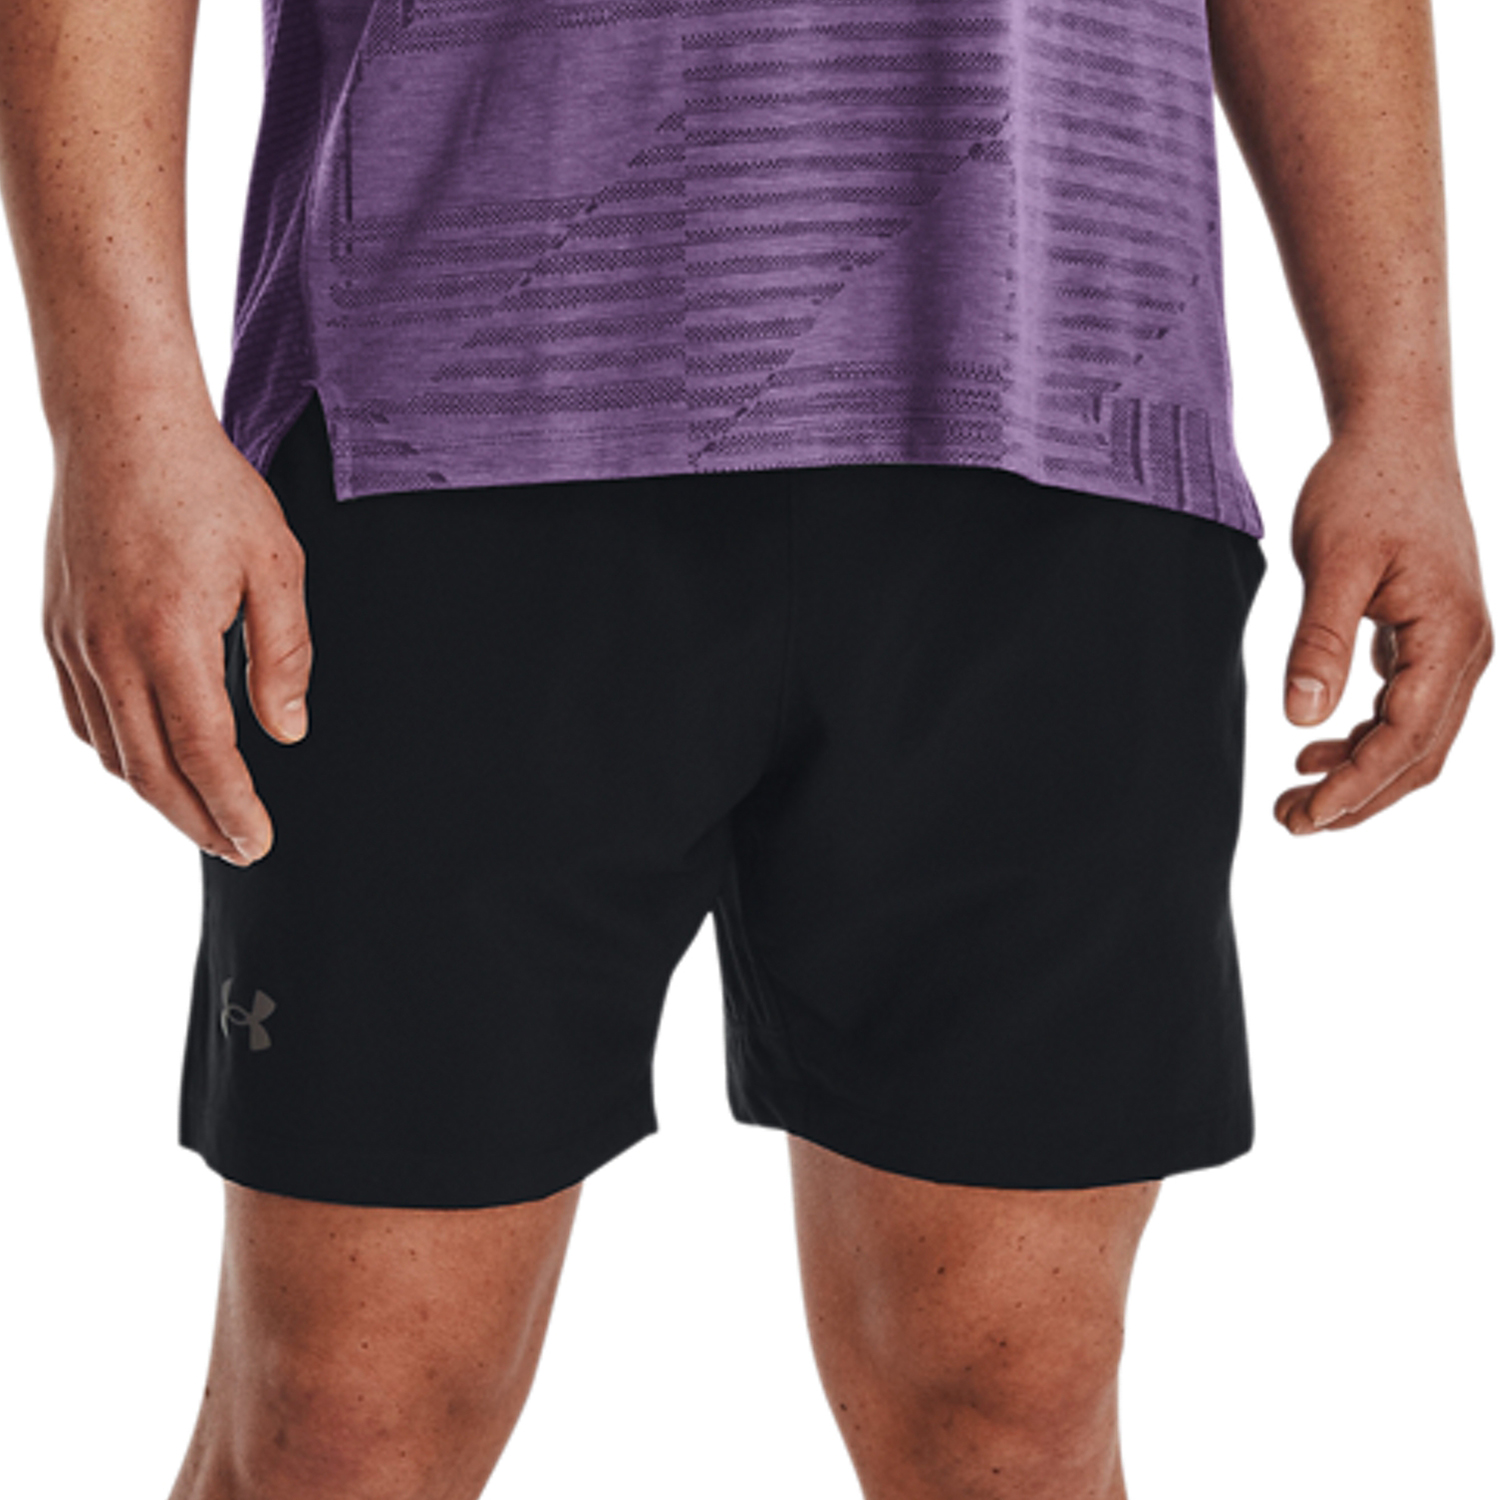 Under Armour Launch Elite 2 in 1 7in Shorts - Black/Reflective